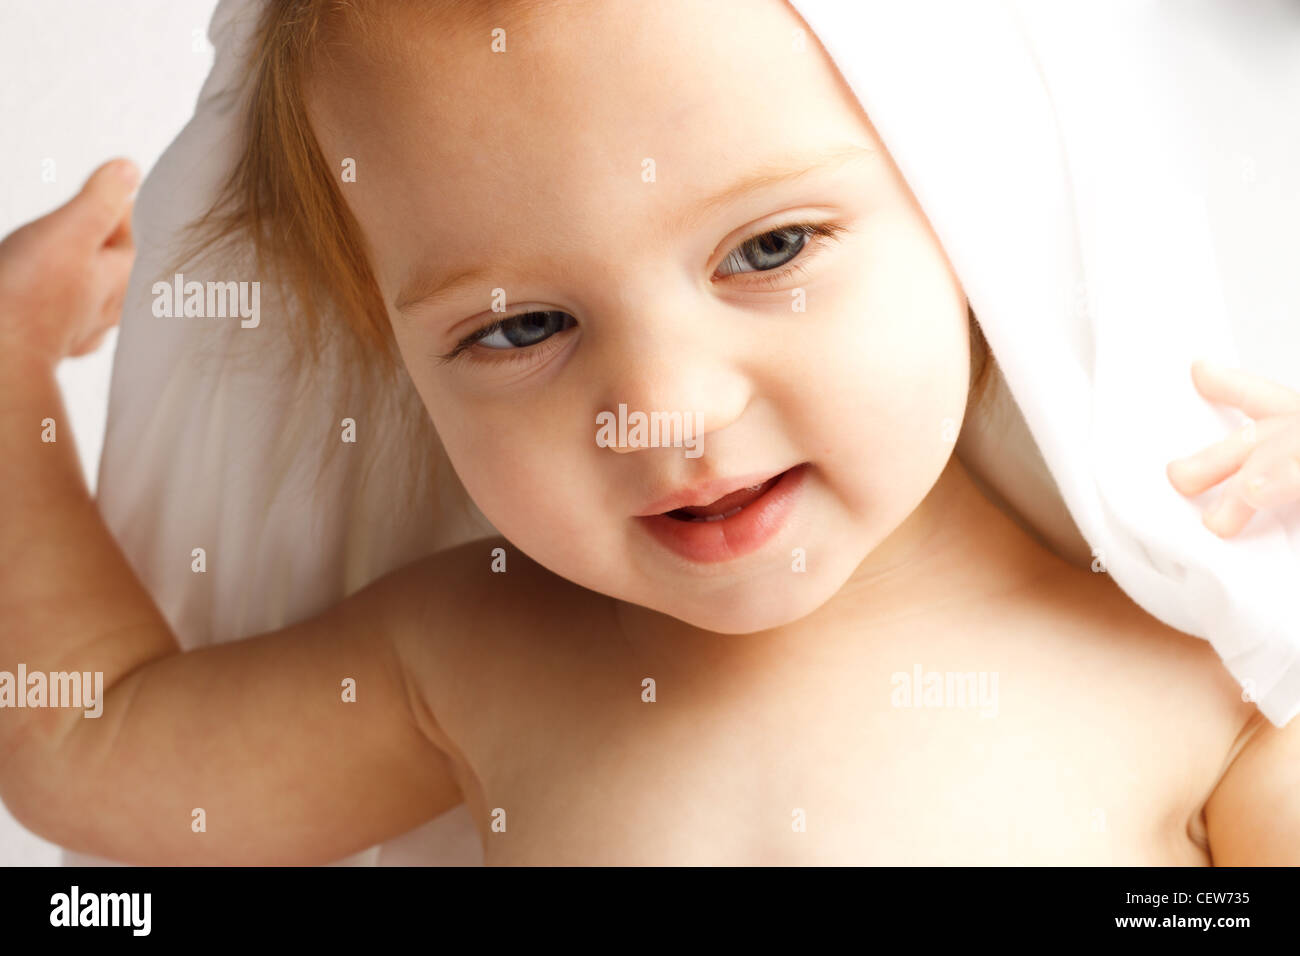 Adorable baby peeking out of a white sheet Stock Photo